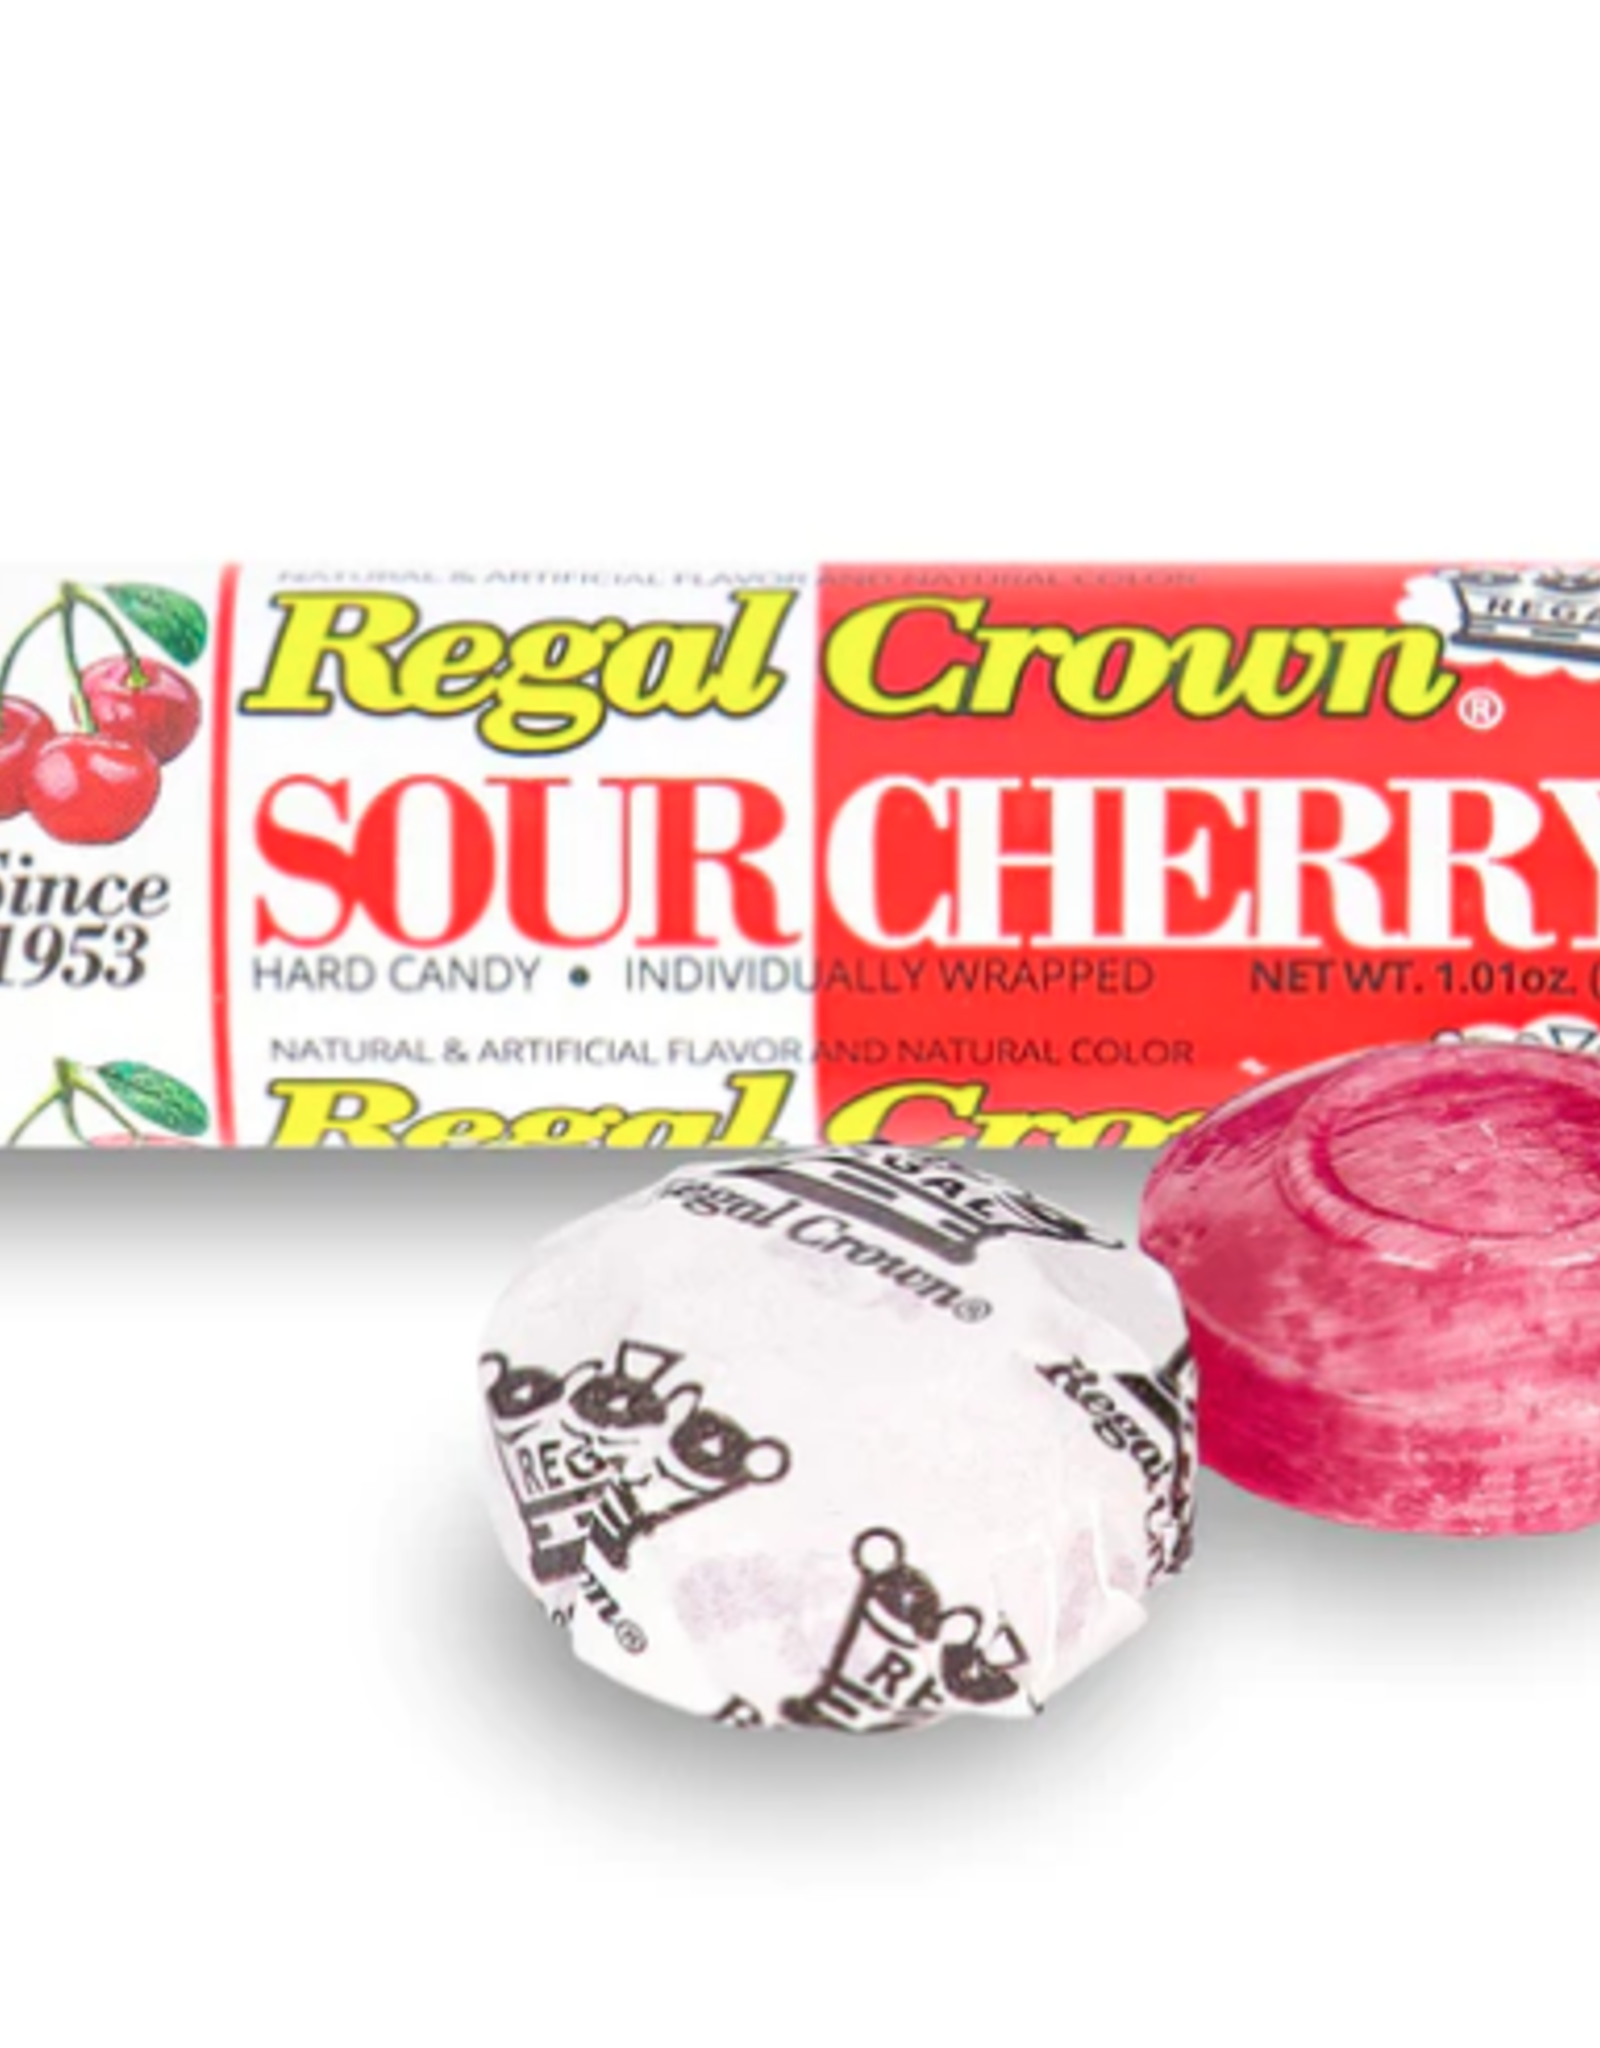 Pacific Candy Regal Sour Cherry